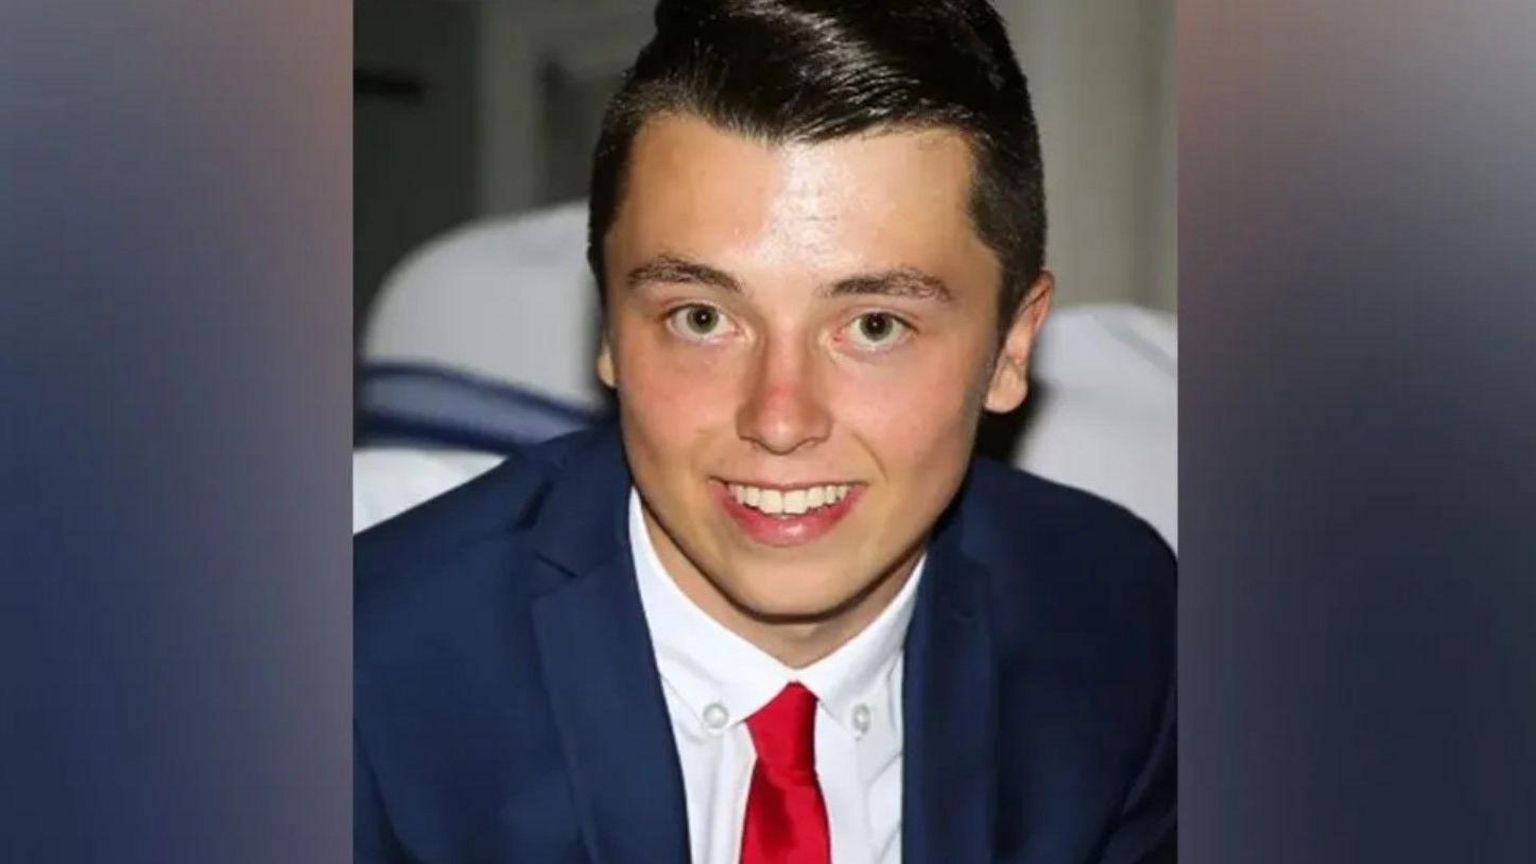 Connor Brown. He is smiling and has short black hair. He wears a blue suit, white shirt and red tie